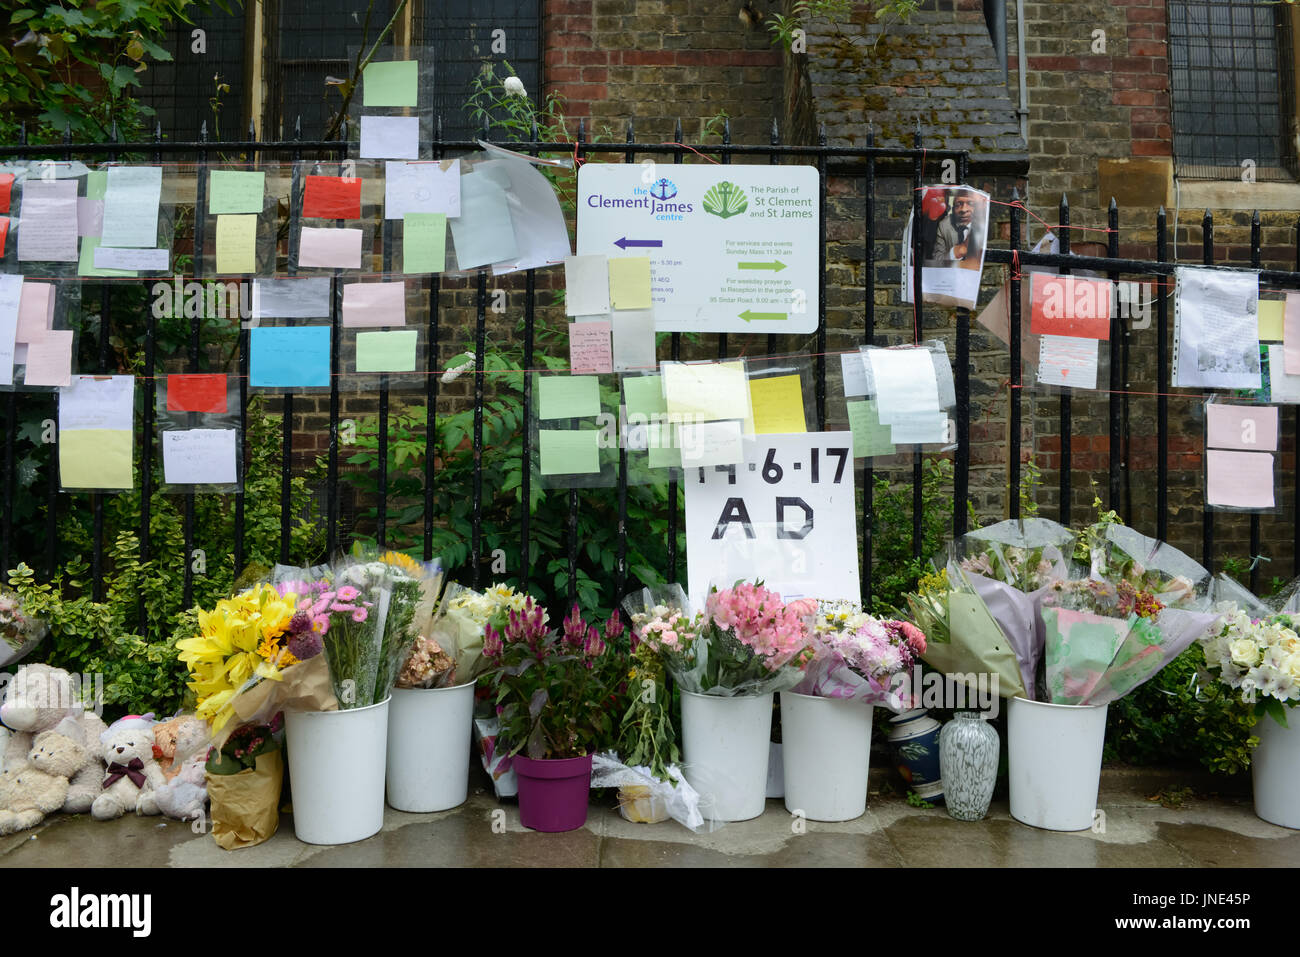 Grenfell Tower tributes near a local church in the area. Stock Photo